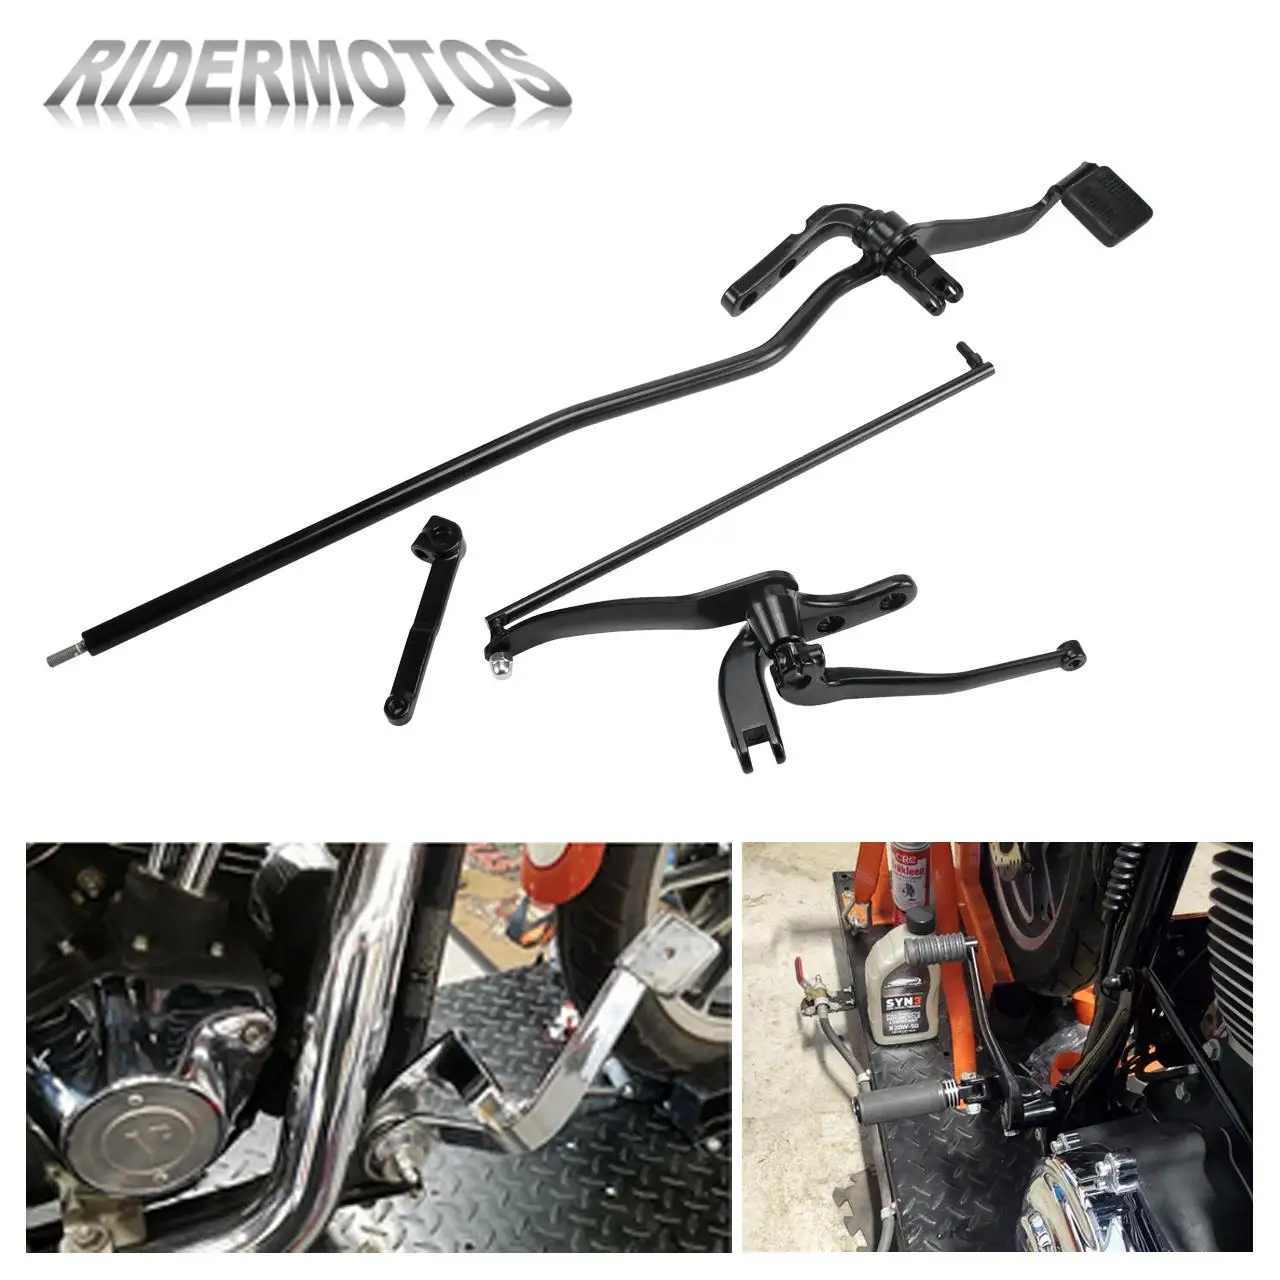 

Motorcycle Black Forward Controls Complete Kit Levers Linkages For Harley Dyna Fat Bob FXDF Super Glide Street Bob 2006-2017